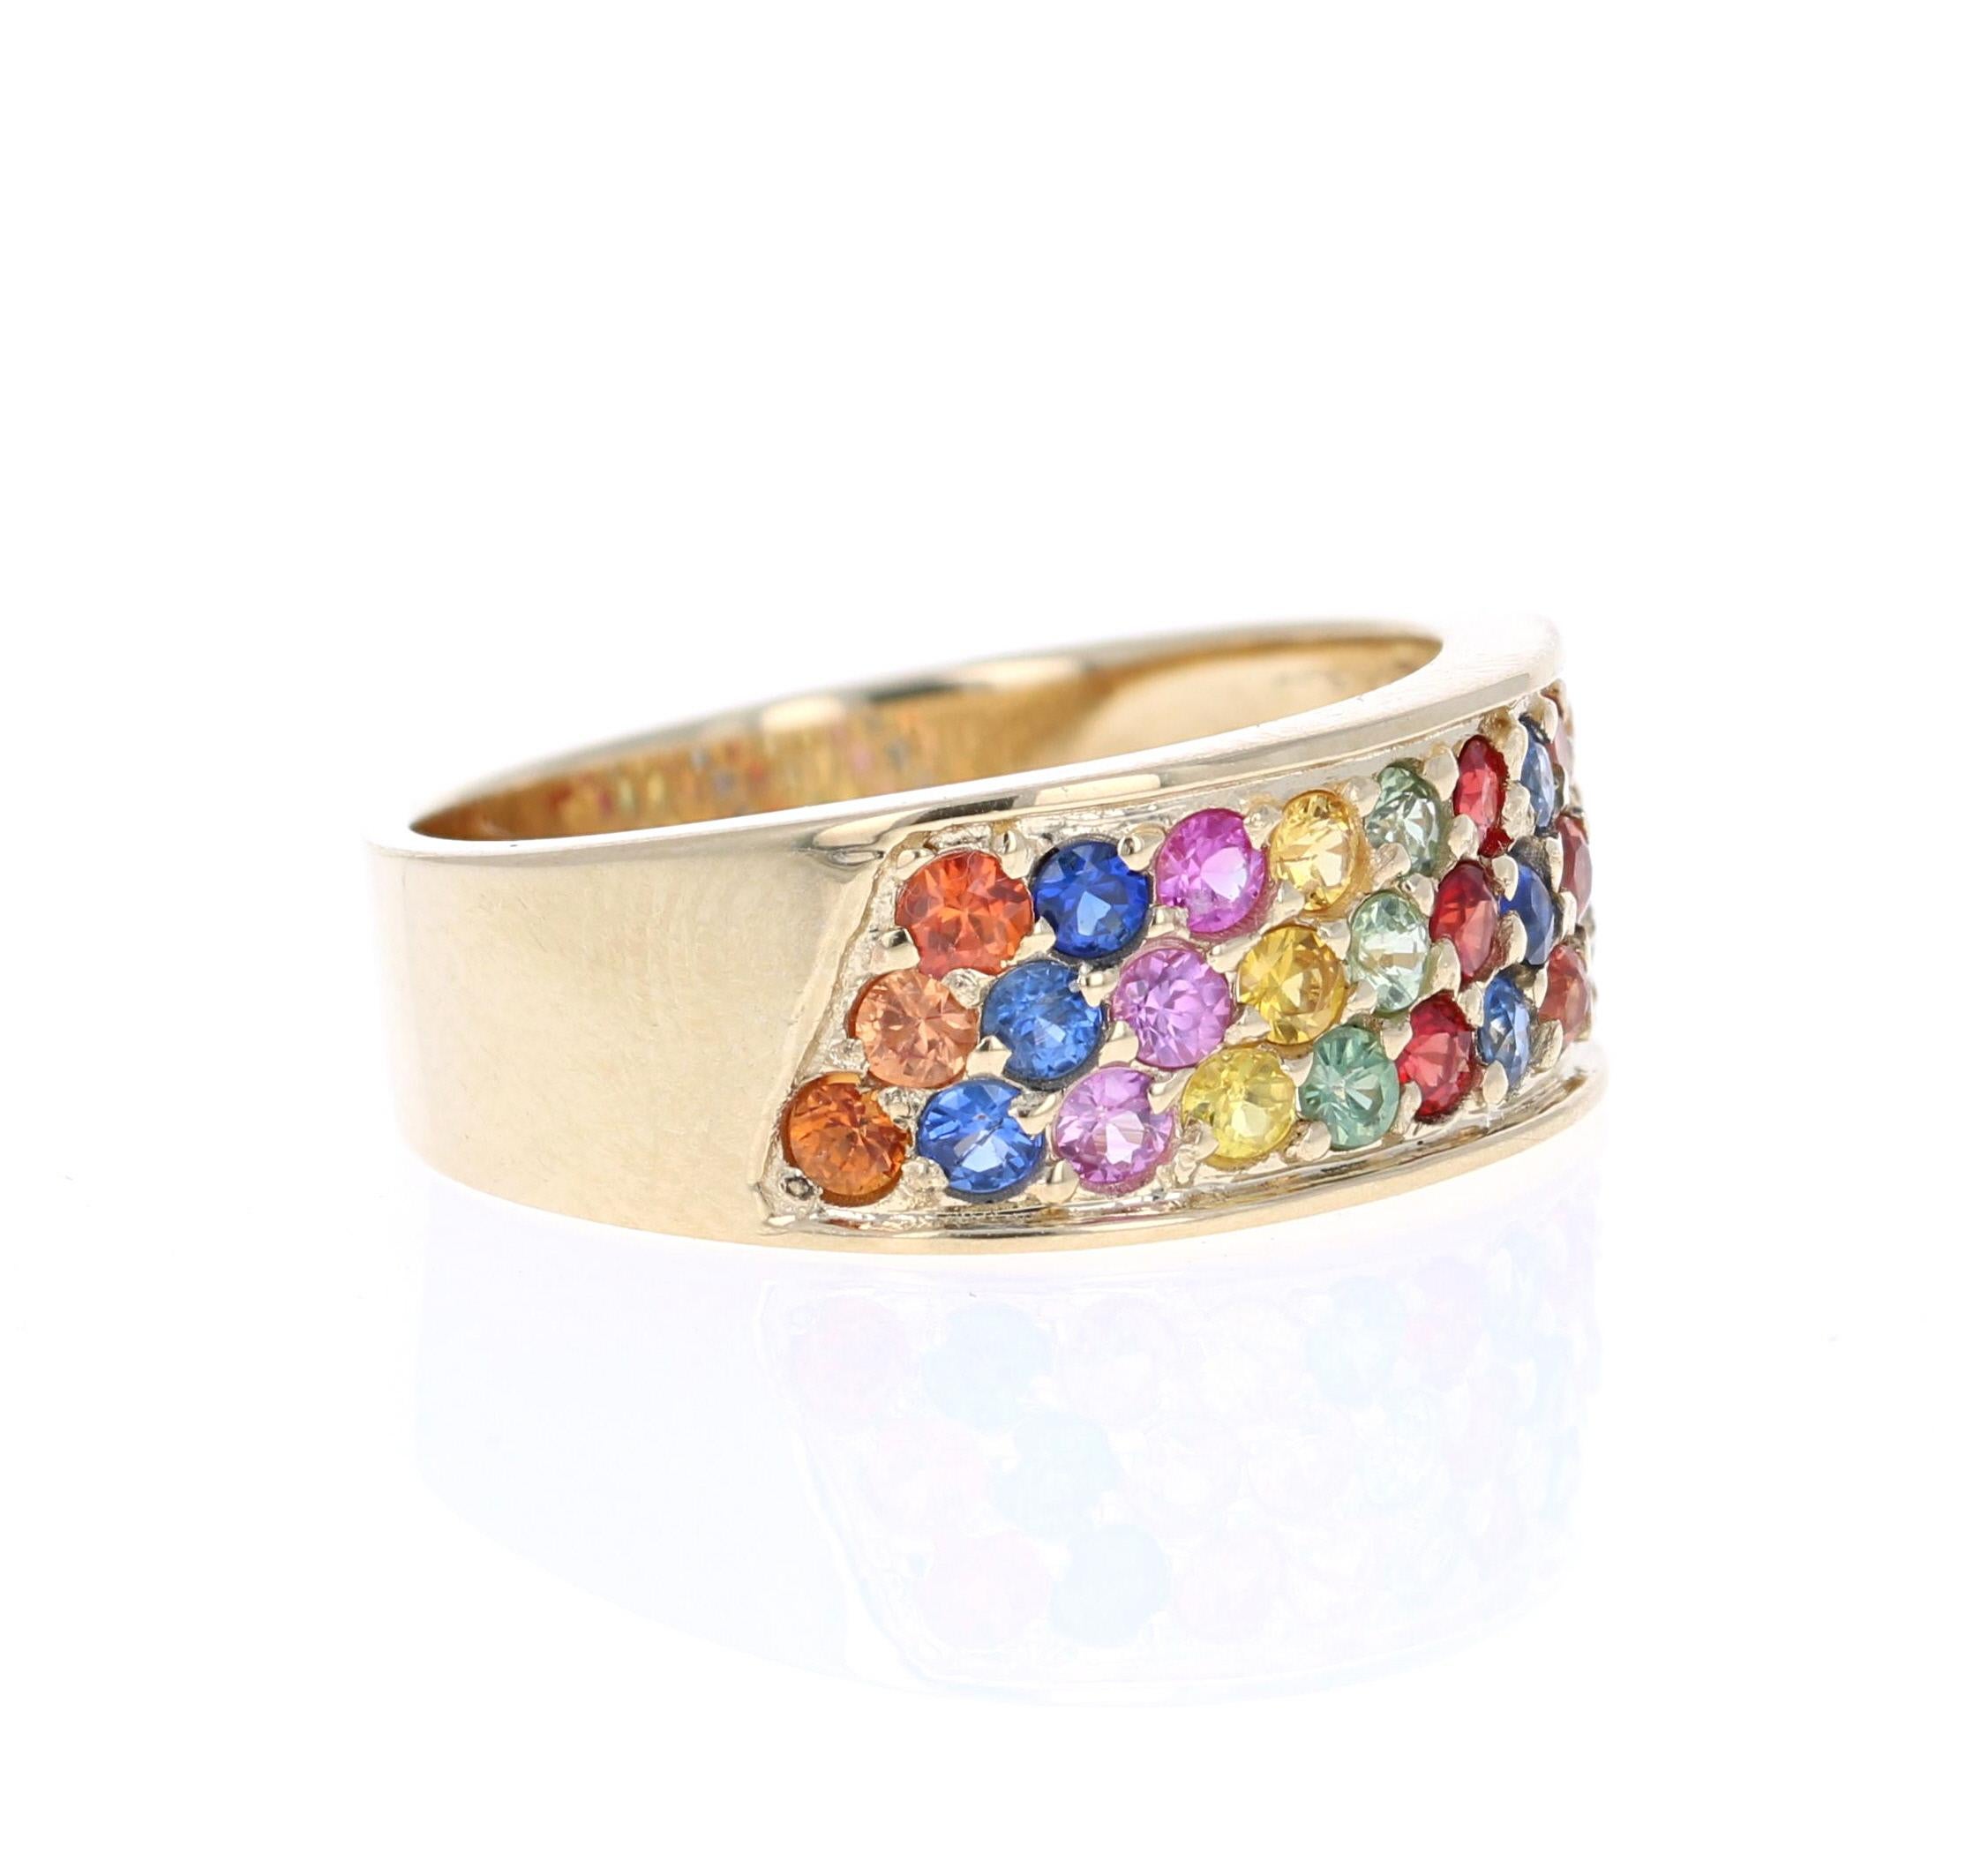 1.95 Carat Multi Color Sapphire 14 Karat Yellow Gold Band

There are 33 Multi Color Natural Sapphires in this band that weigh 1.95 Carats. It is made in 14K Yellow Gold and weighs approximately 5.0 Grams.
The band is a size 7 and can be re-sized at